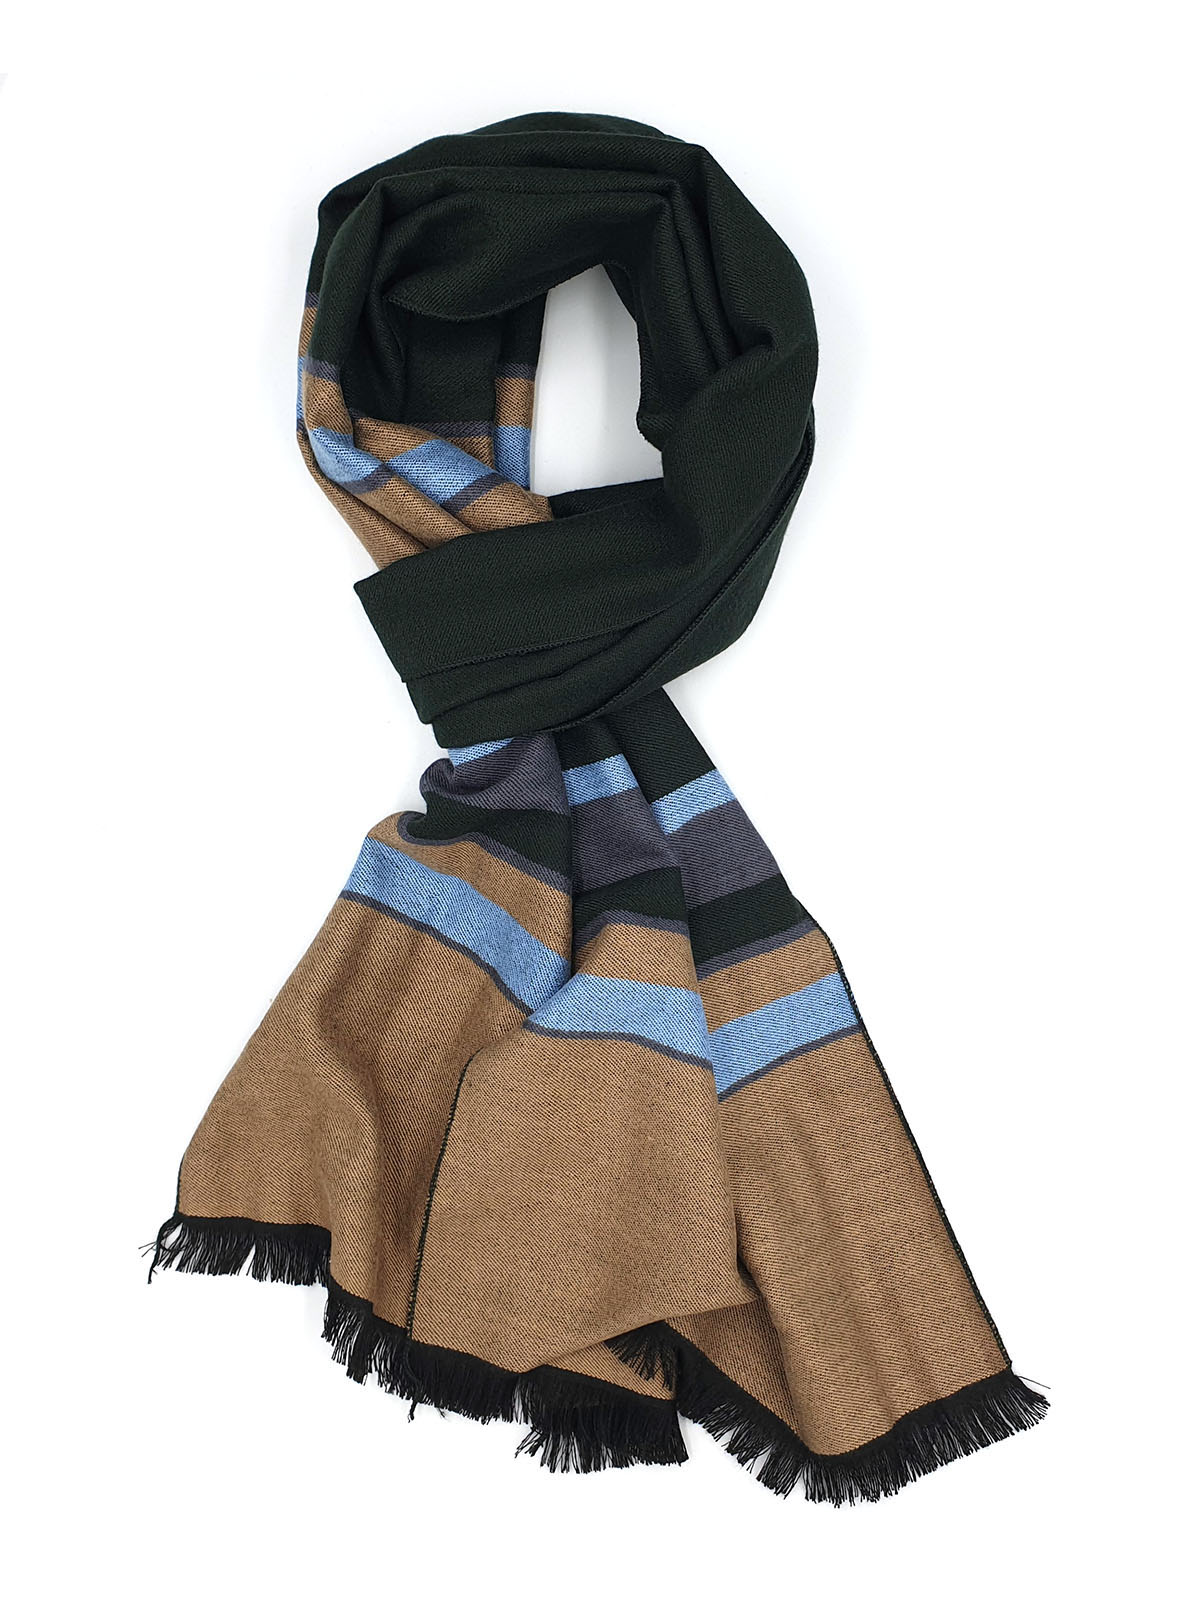 Scarf in black with a colorful stripe - 10350 - € 19.68 img4